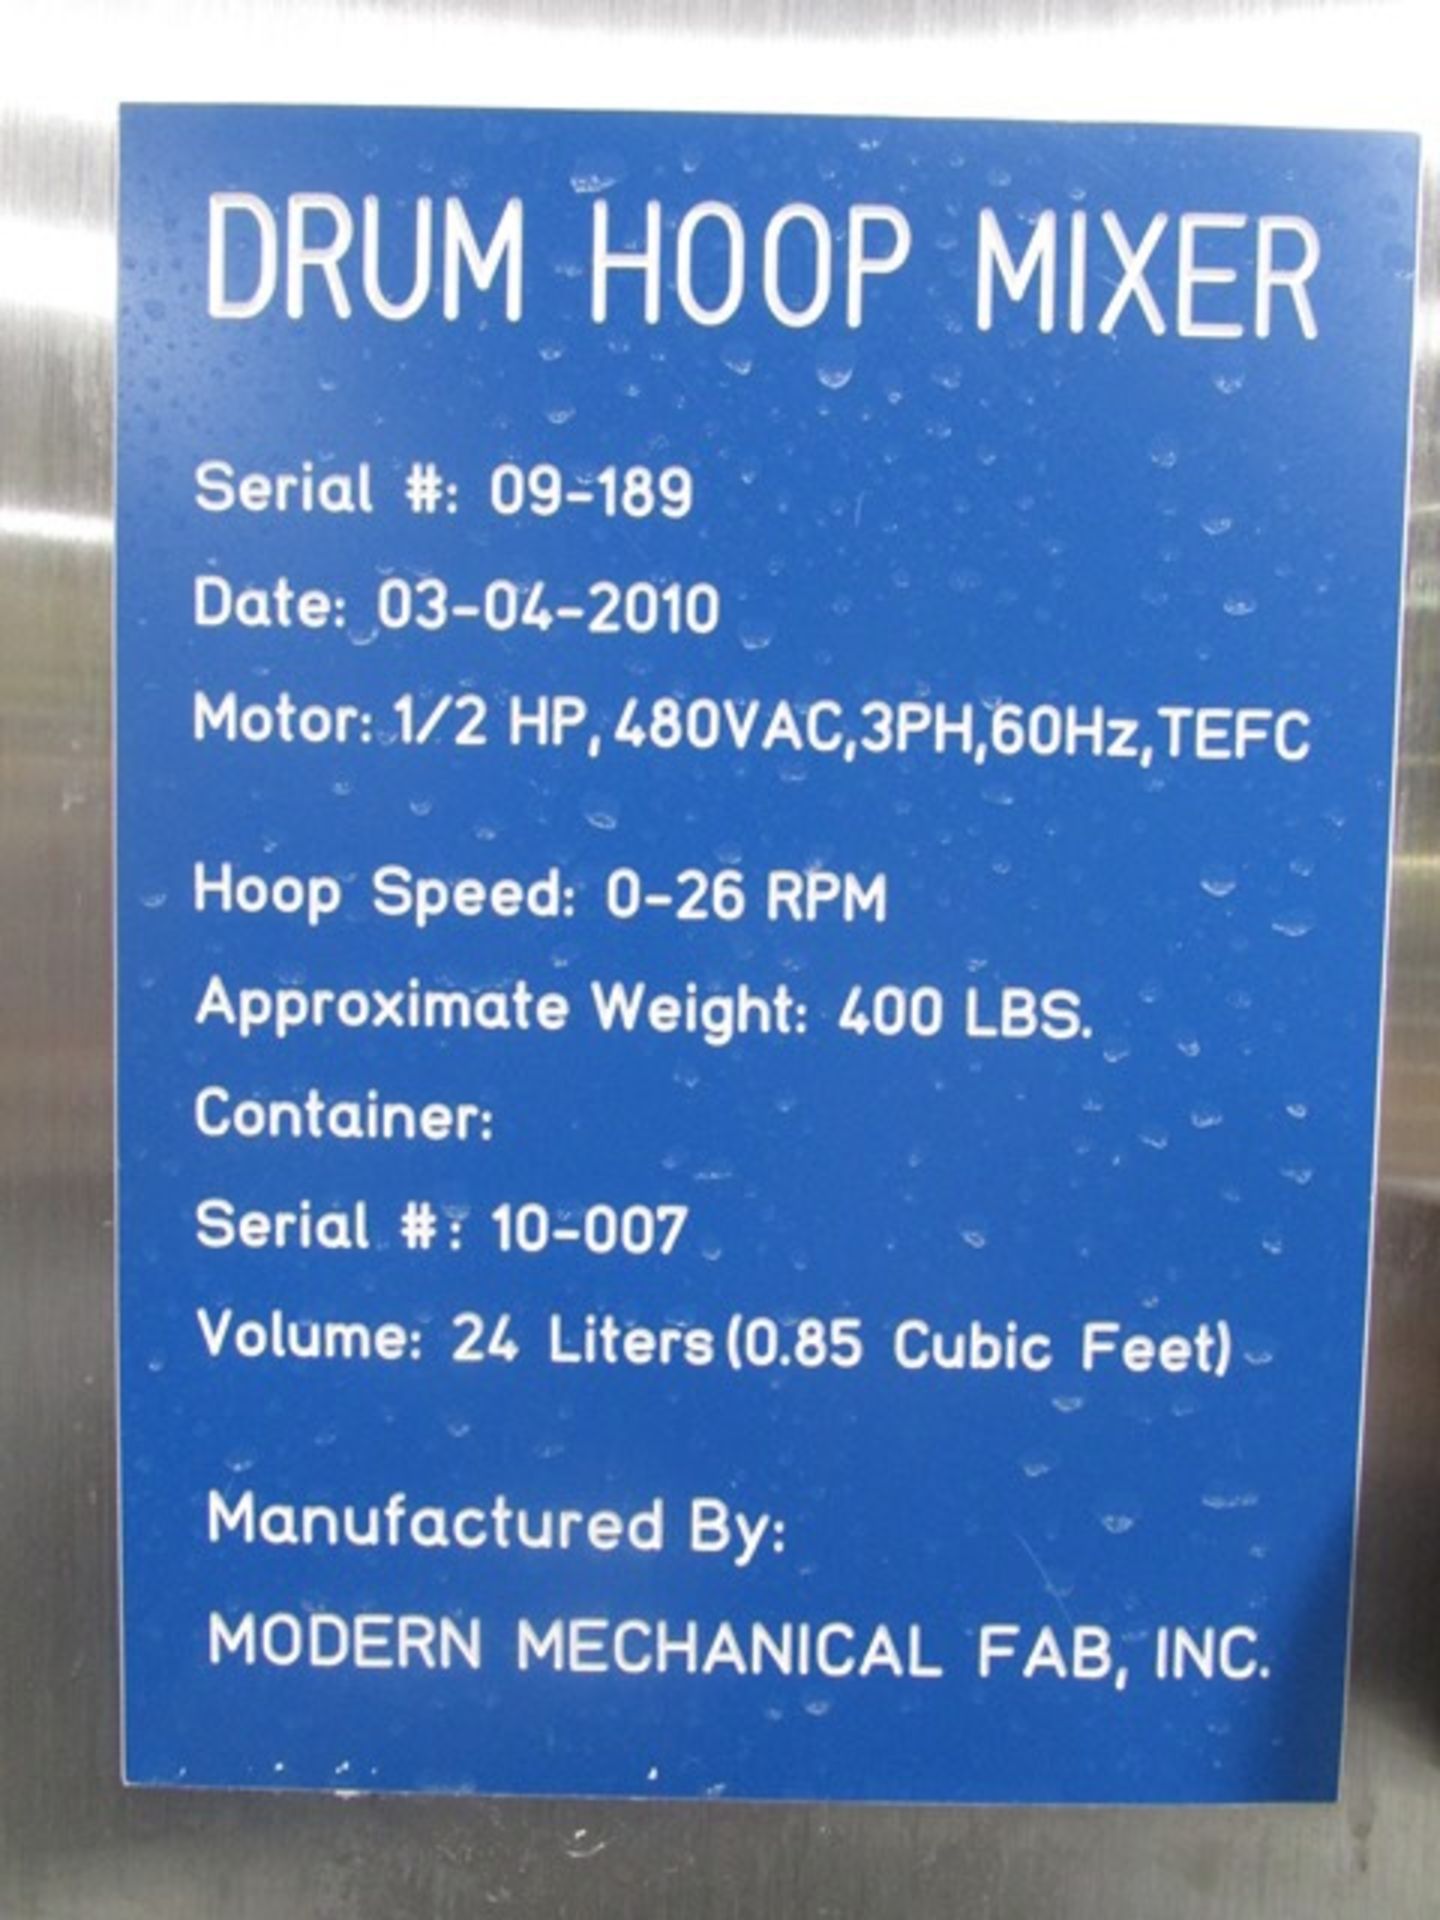 Drum hoop mixer, meant for 20" L x 12" diameter drum, 0-26 RPM operating speed, with 0.5 hp motor, - Image 9 of 9